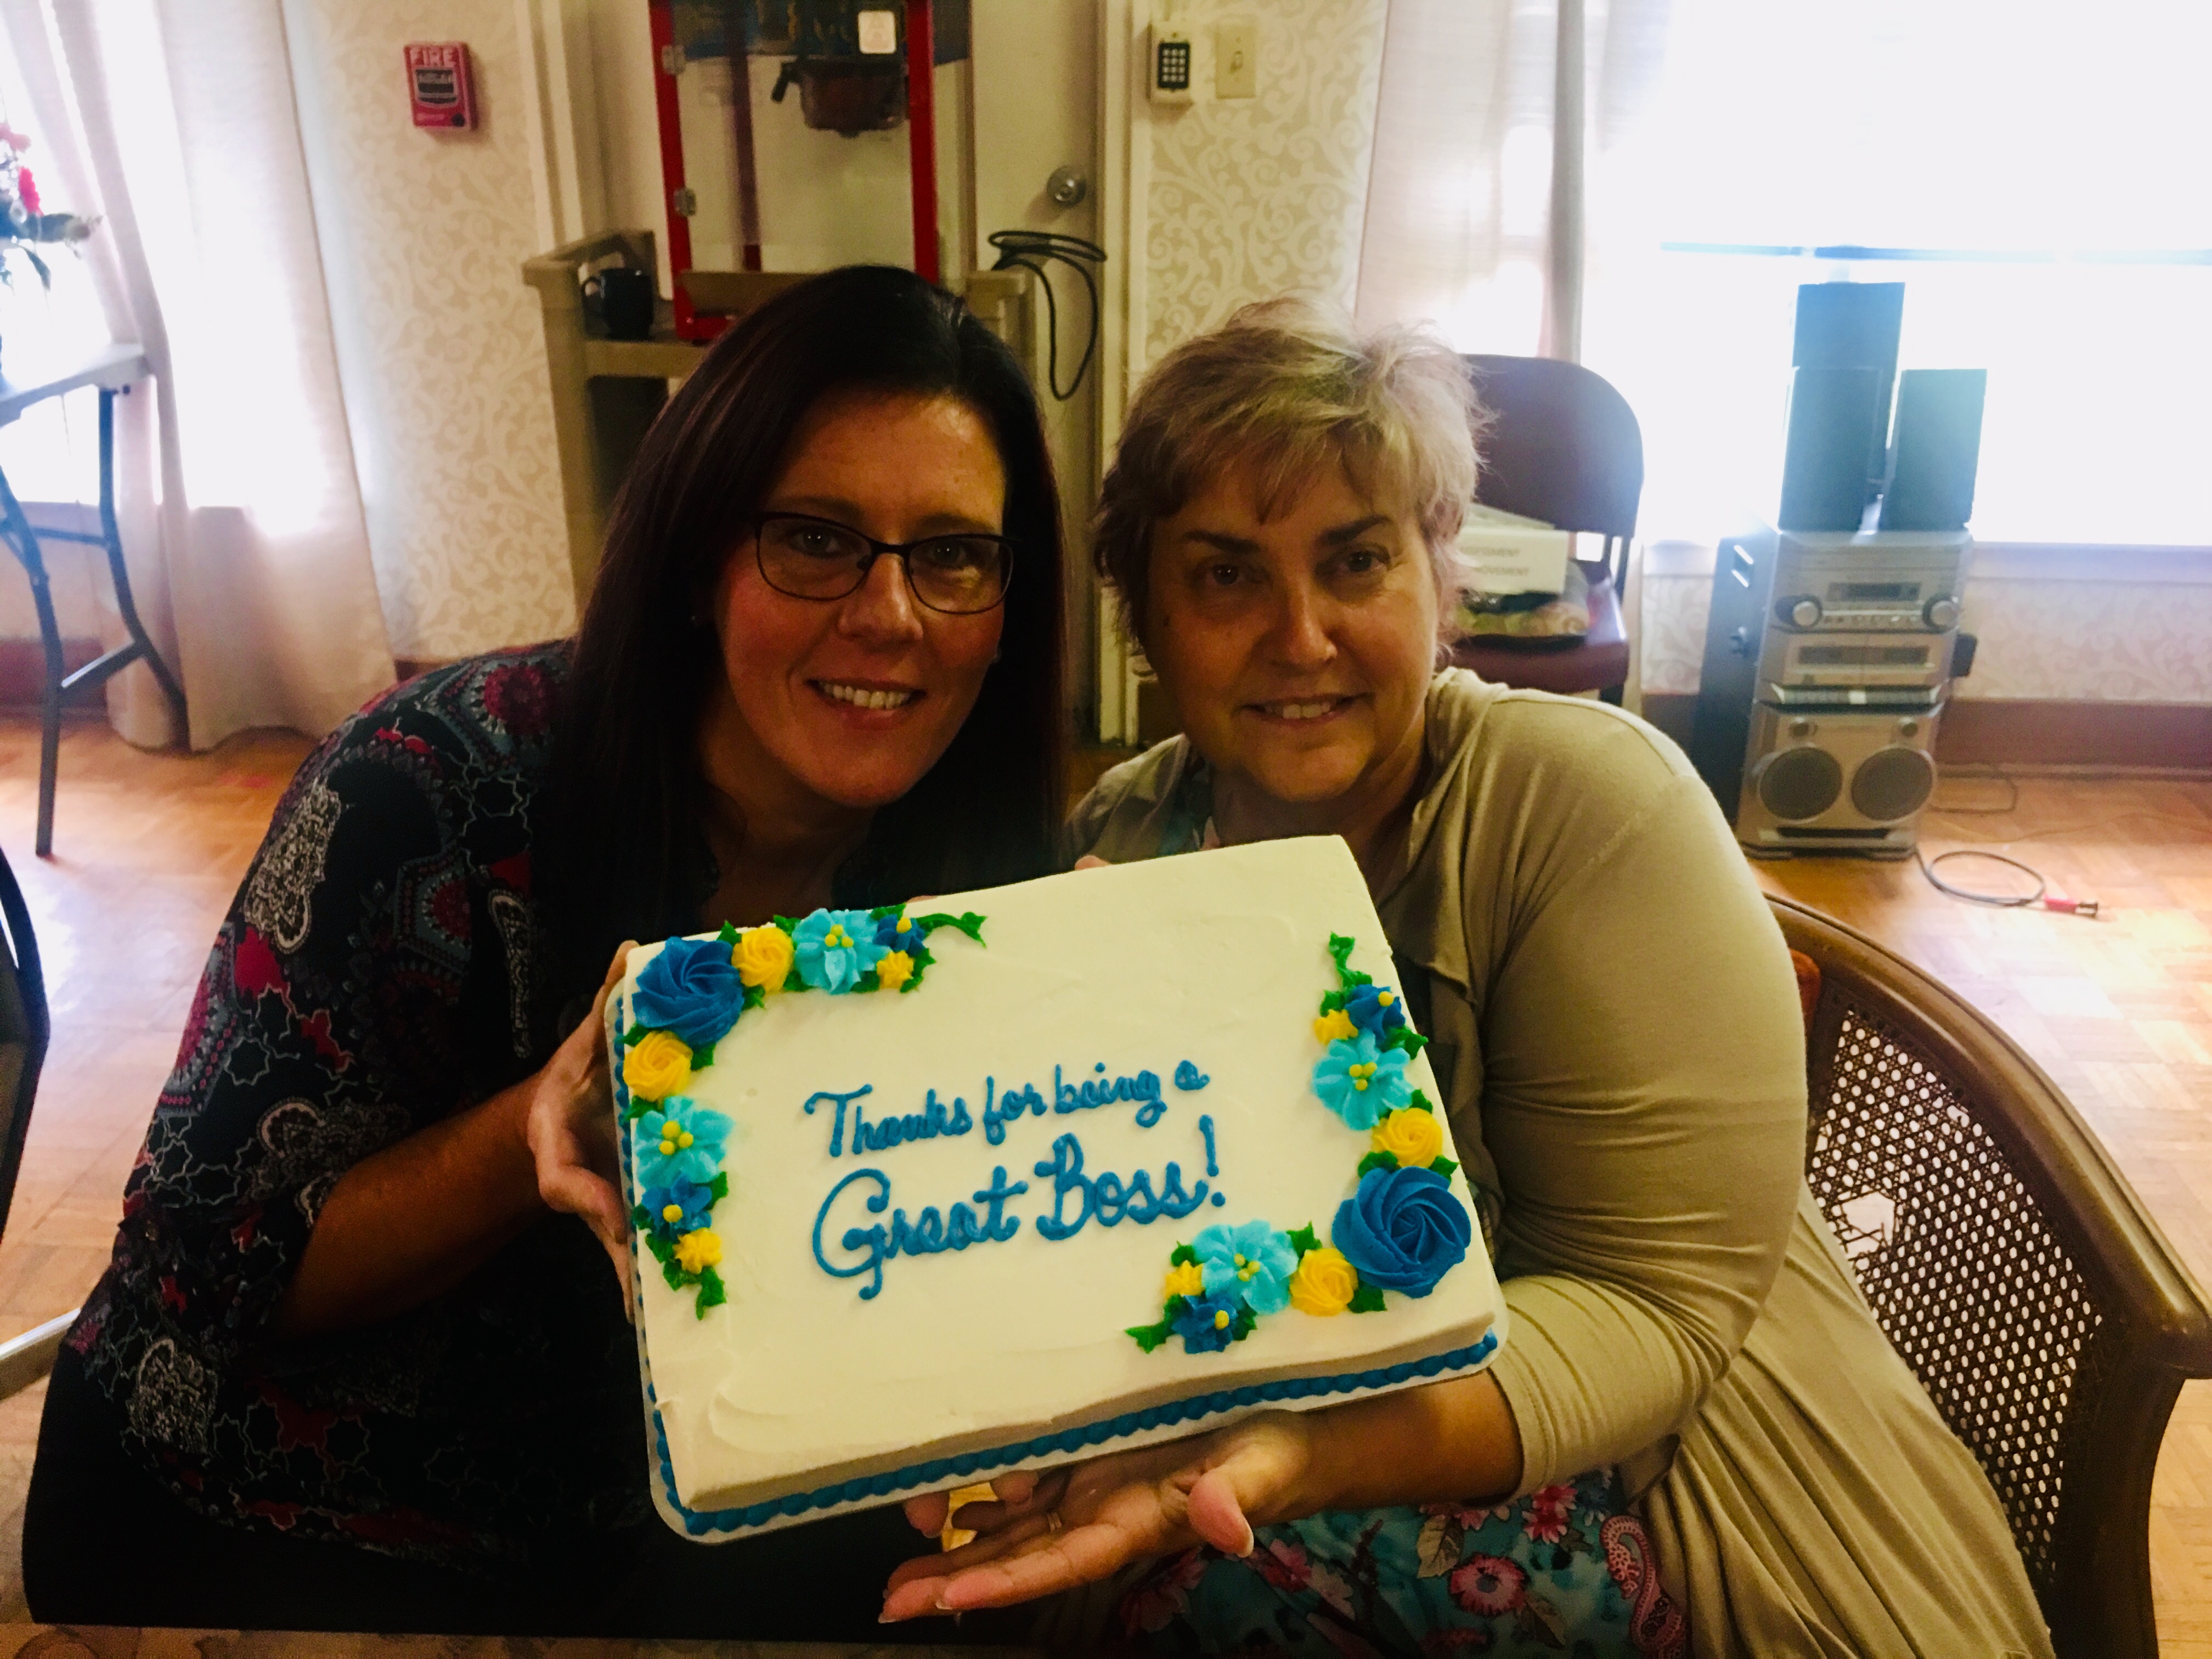 Staff members holding up a cake that says thanks for being a great boss!